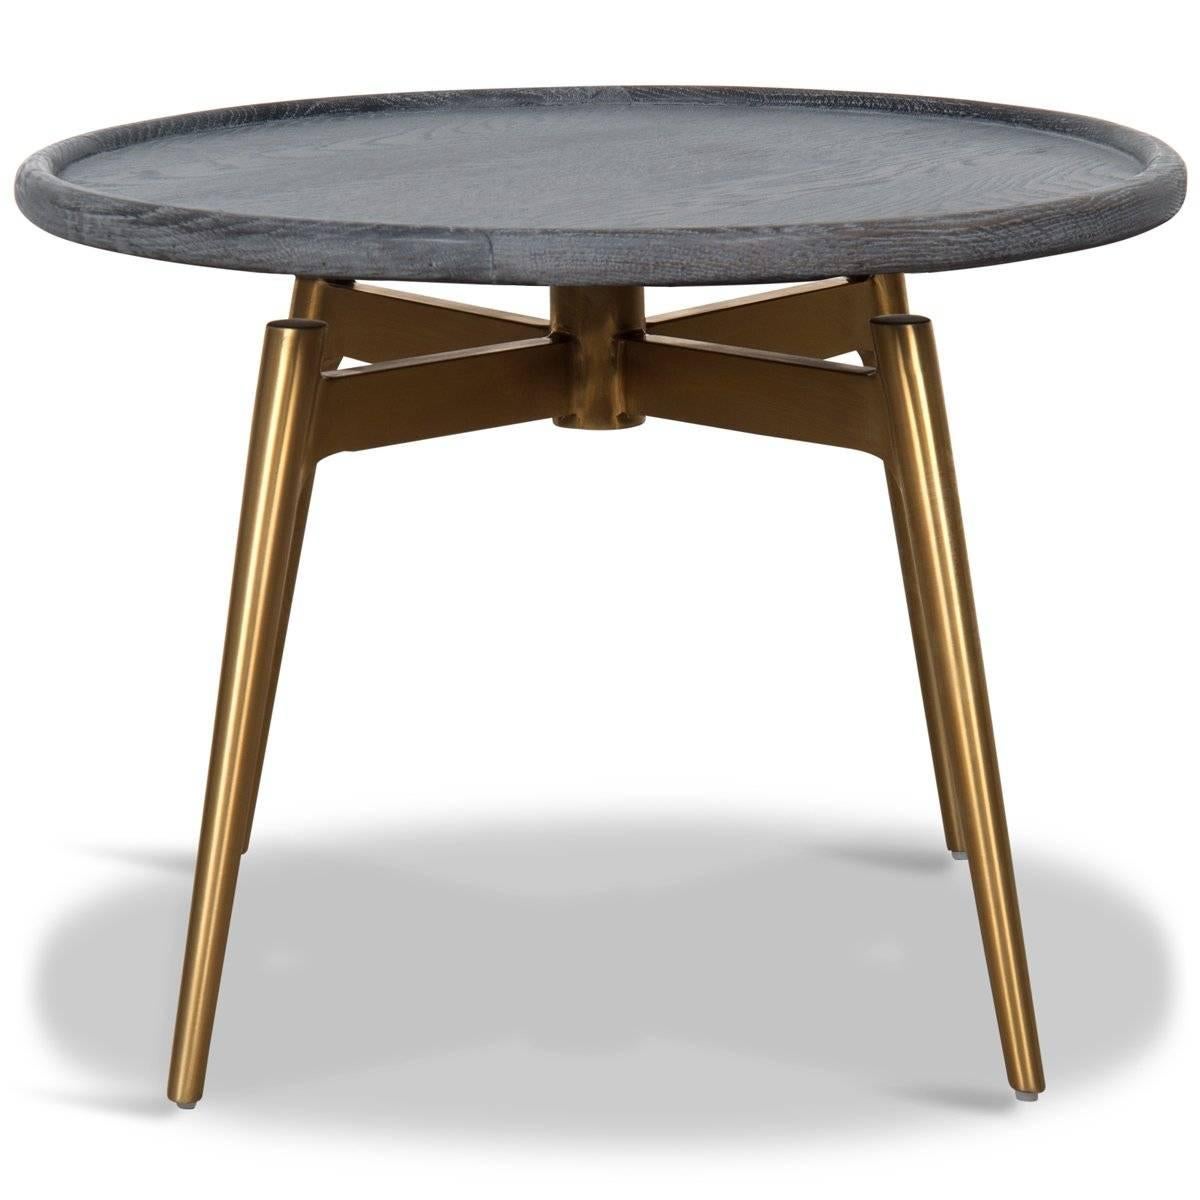 Featuring a round light charcoal wood top and angular brushed brass legs, the Copenhagen Side Table is a beautiful modern addition to any living room or bedroom. The natural wood texture and the industrial charcoal and brass colors blend for a clean